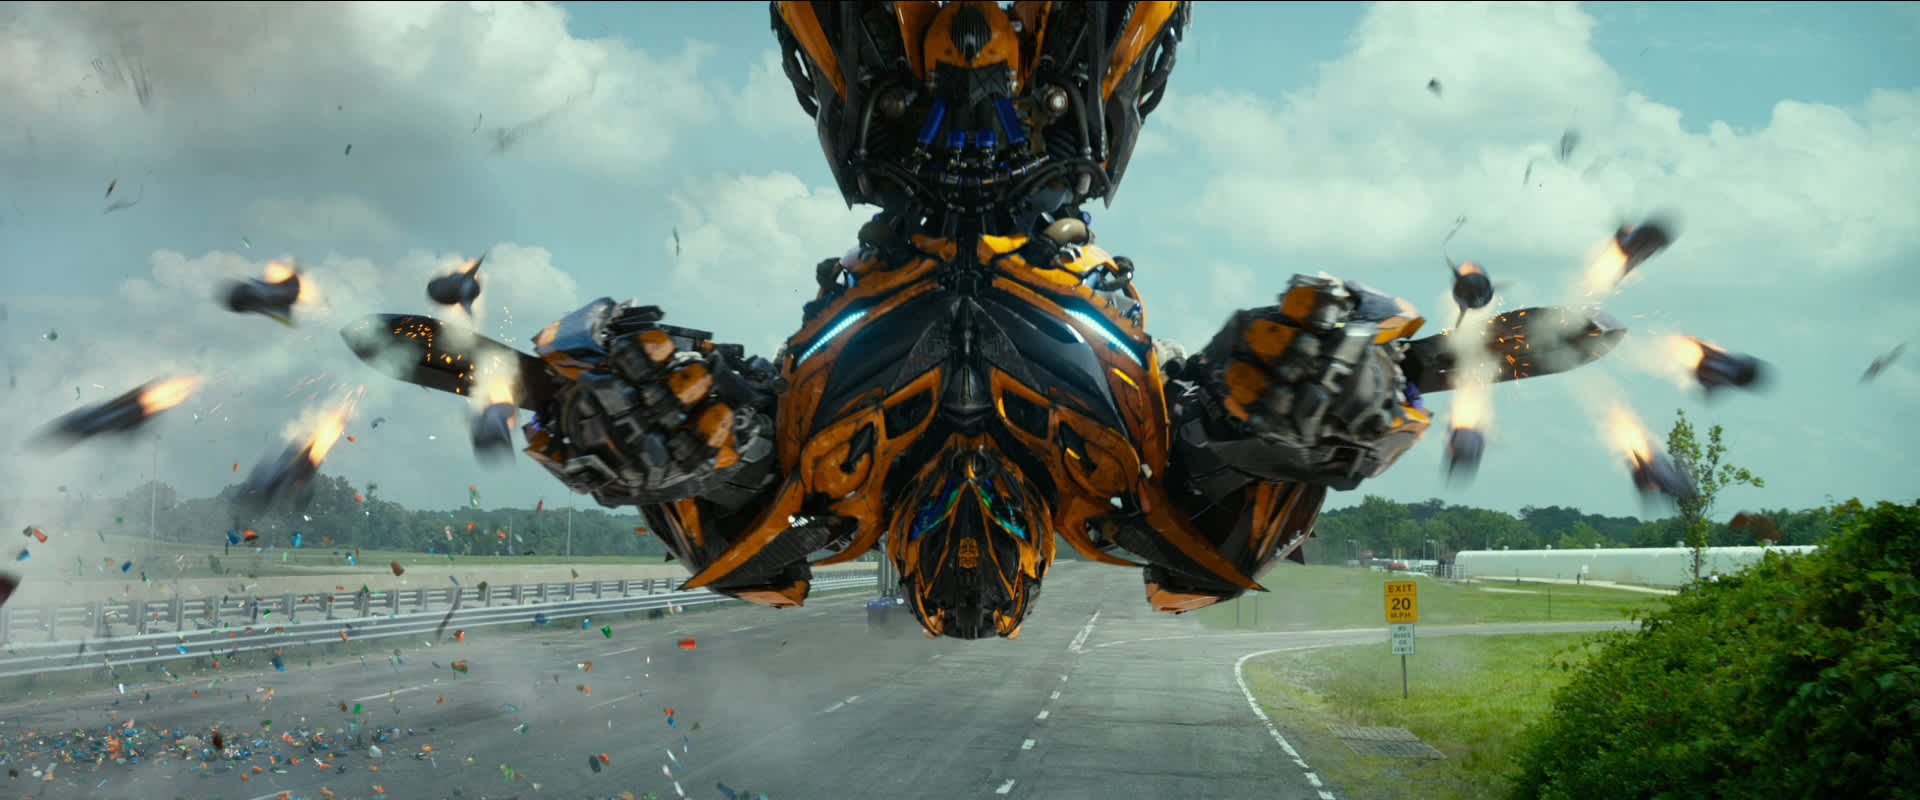 Transformers: Age of Extinction background 1